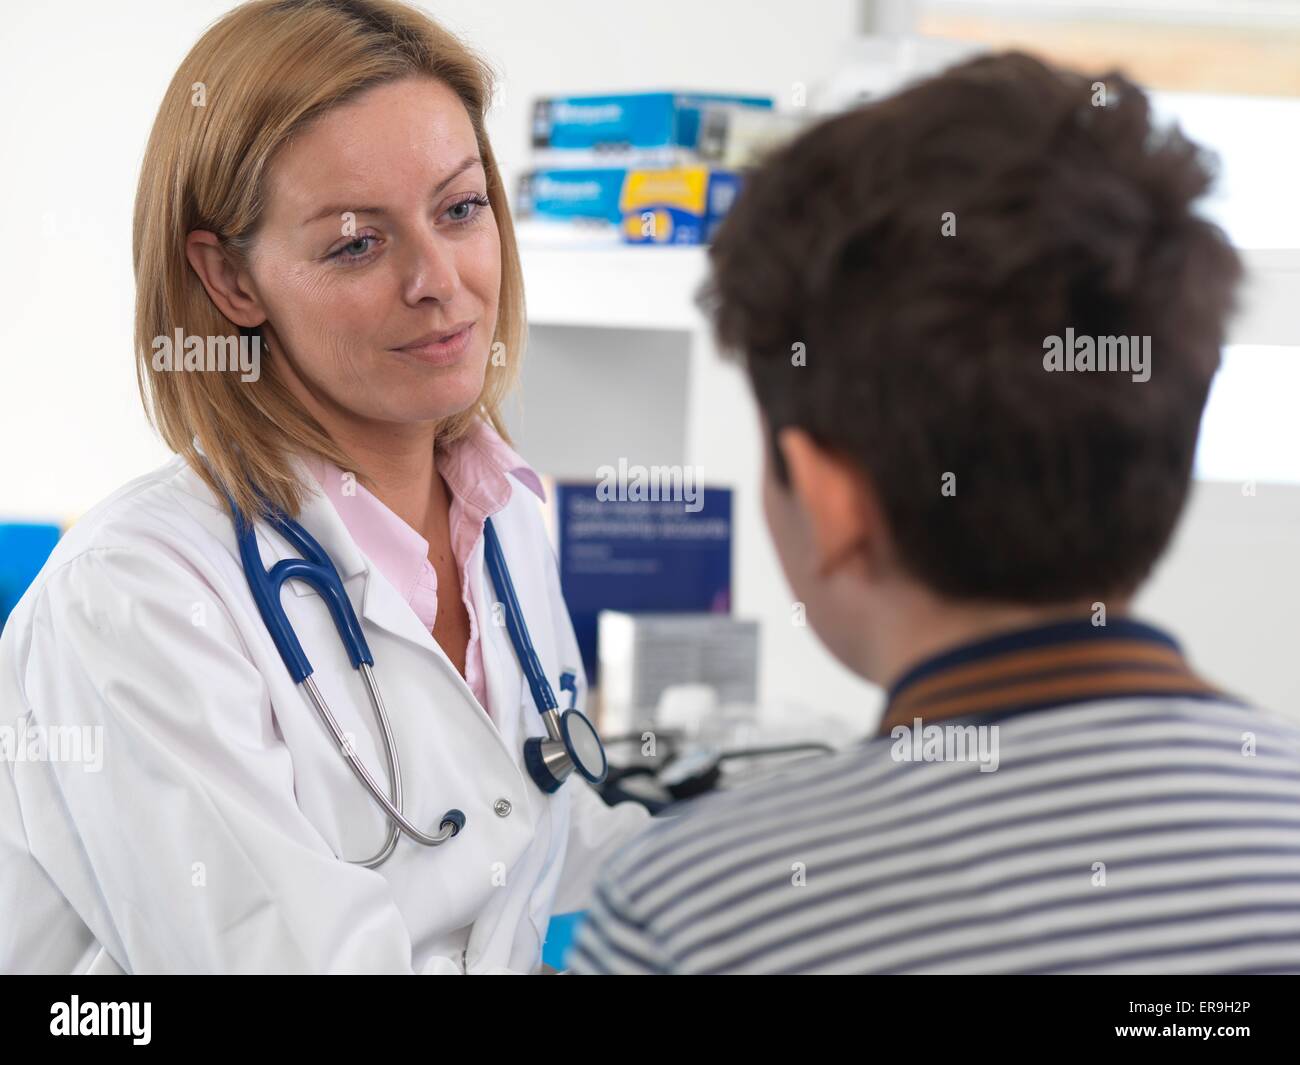 PROPERTY RELEASED. MODEL RELEASED. Doctor comforting a 10 year old boy in a clinic. Stock Photo